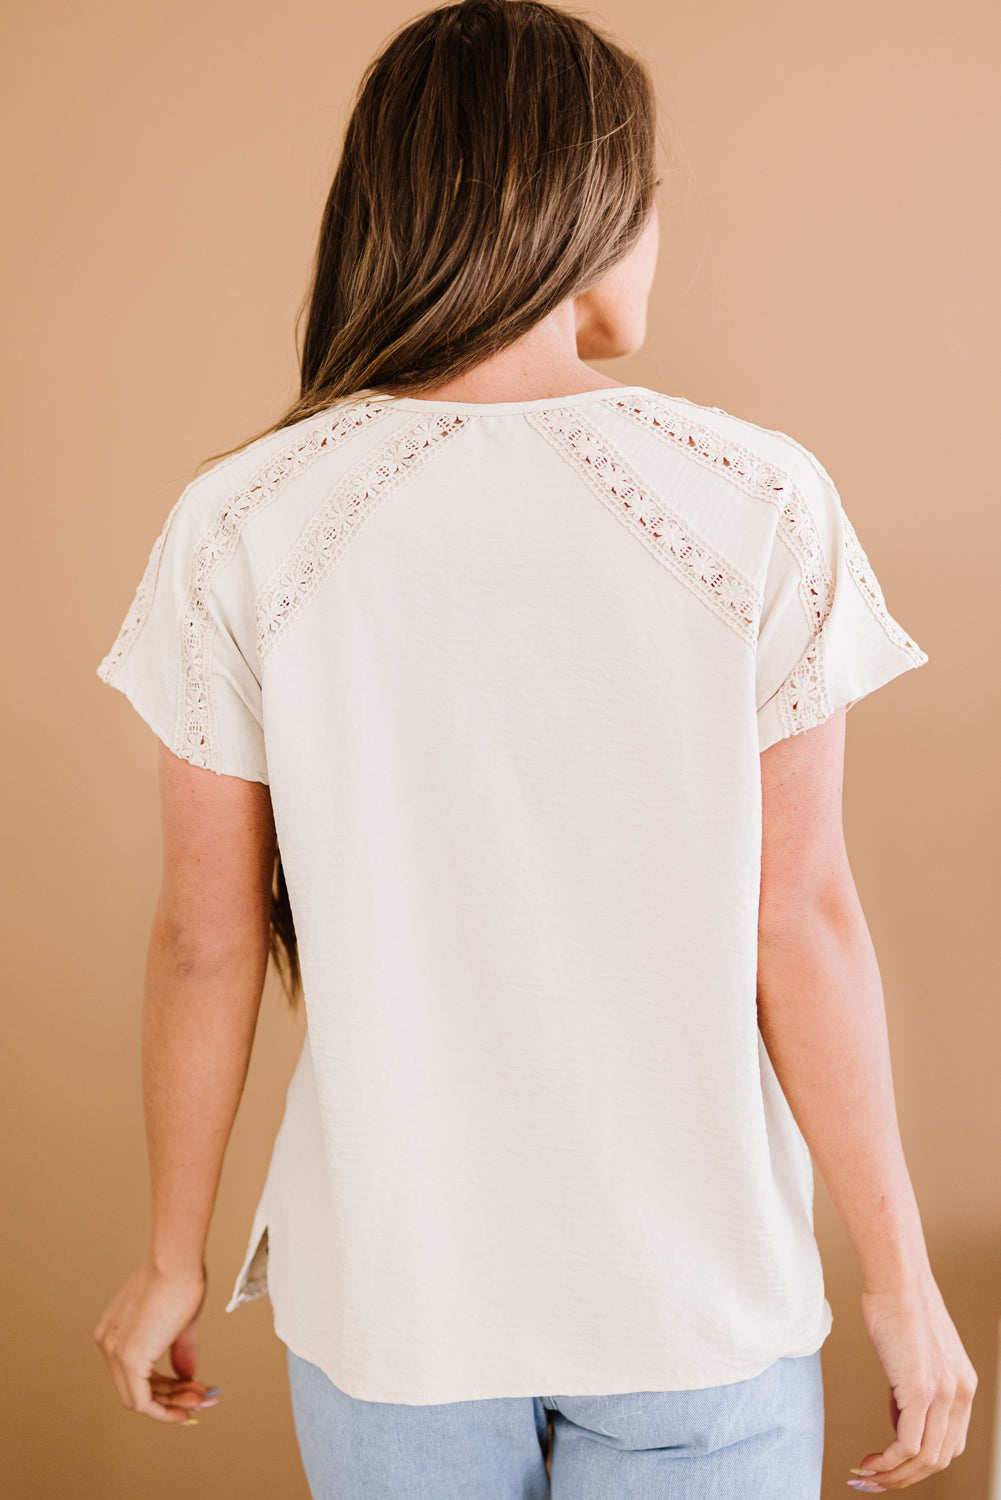 Cape May Crochet Lace Blouse